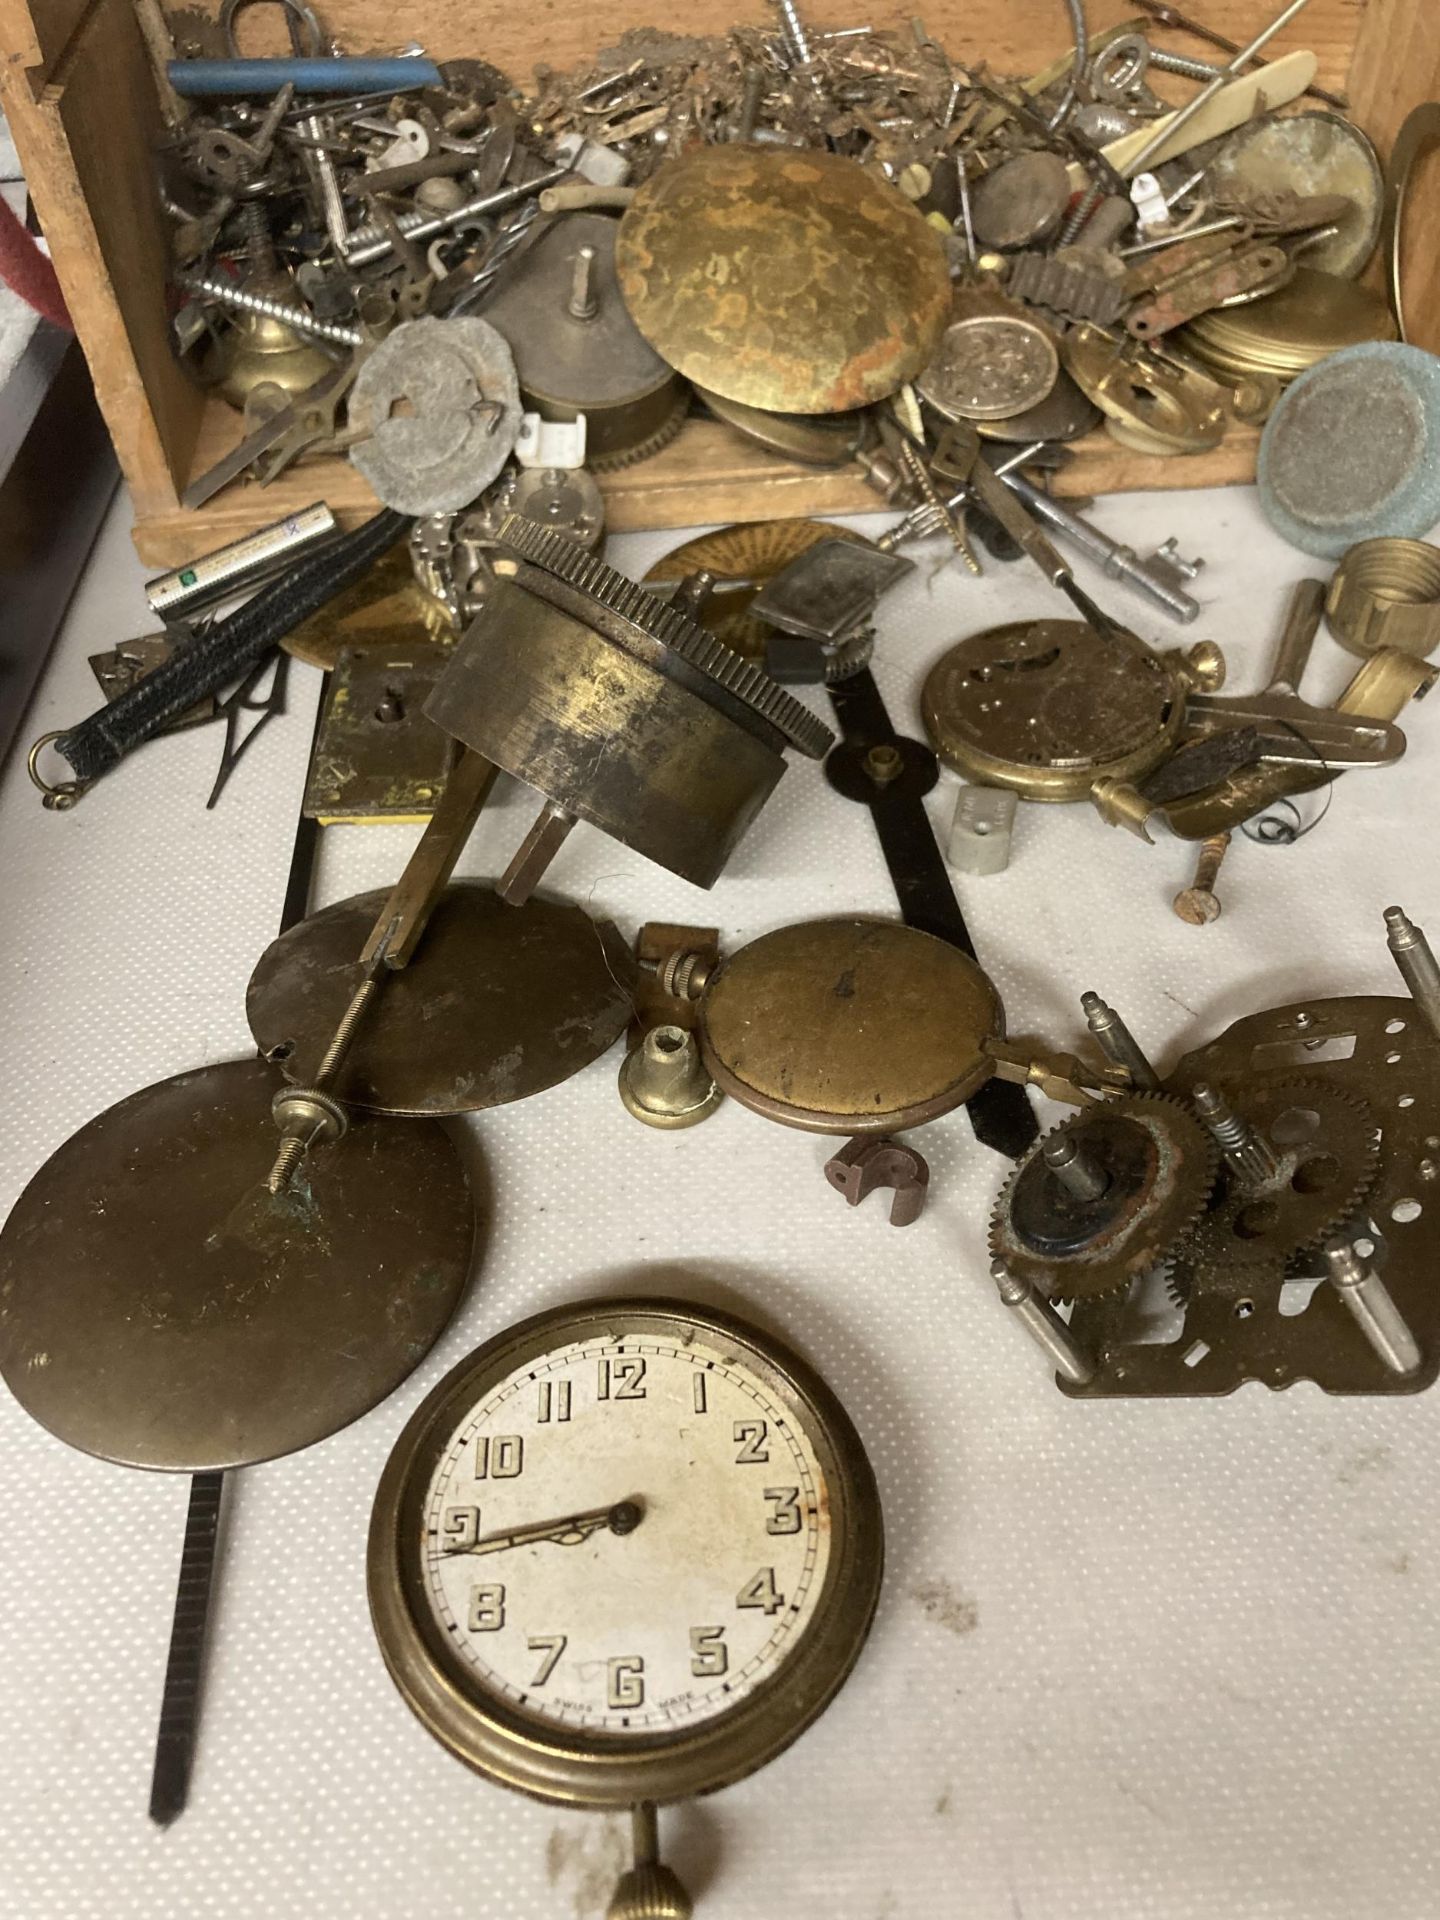 A QUANTITY OF CLOCK AND WATCH SPARE PARTS TO INCLUDE PENDULUMS, KEYS, WATCH FACES, ETC - Image 2 of 3